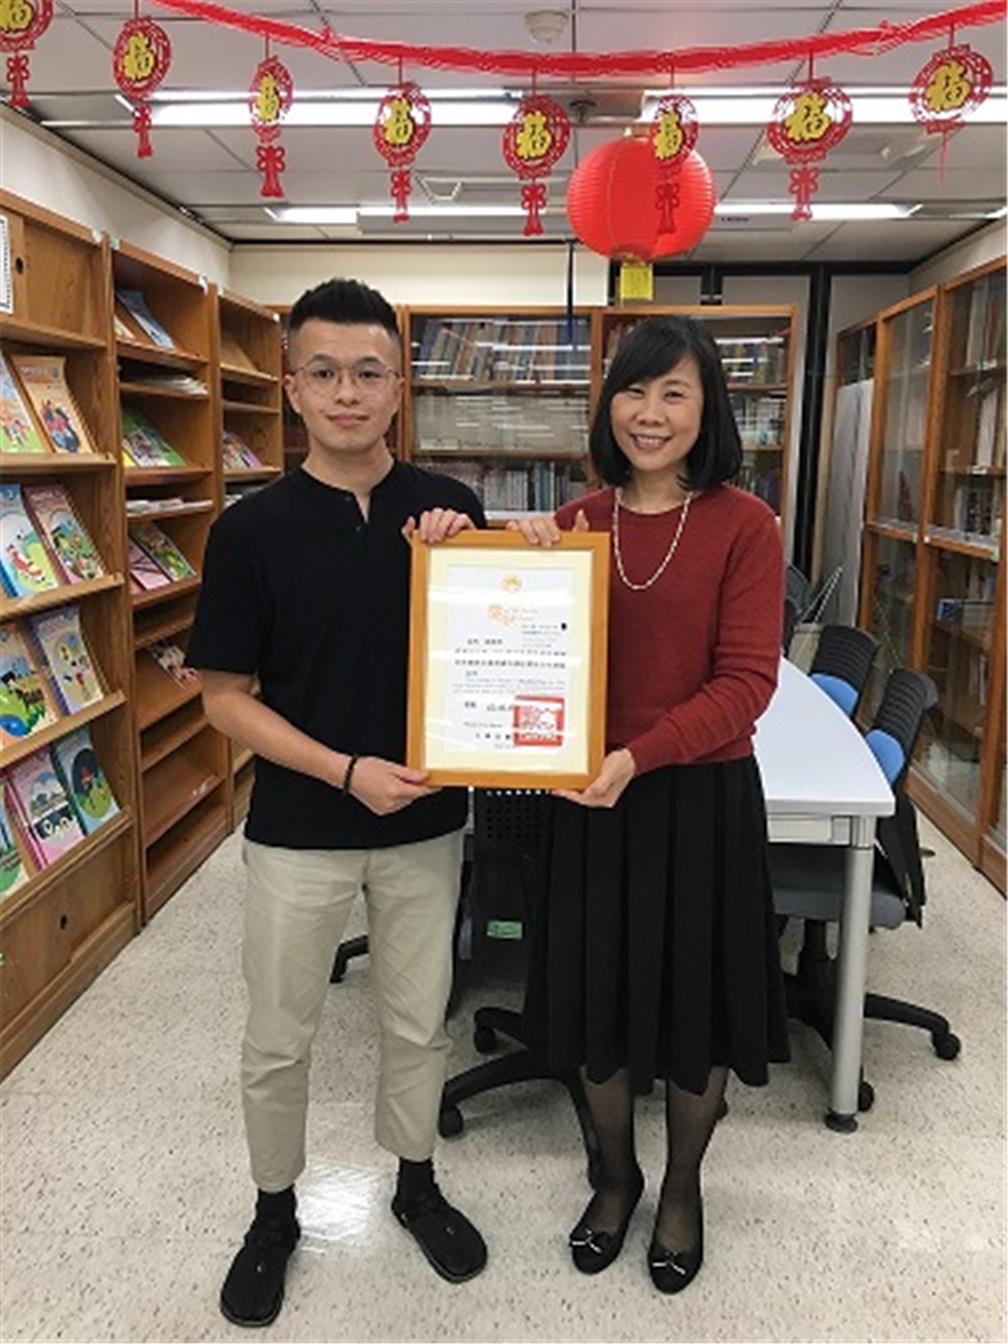 Rong, Director General of the Department of Education Affairs (OCAC), presented a certificate of merit to Shih Chieh-yuan, the OCAC substitute services draftee, in recognition of his excellent service in the Philippines during the second half of 2019.